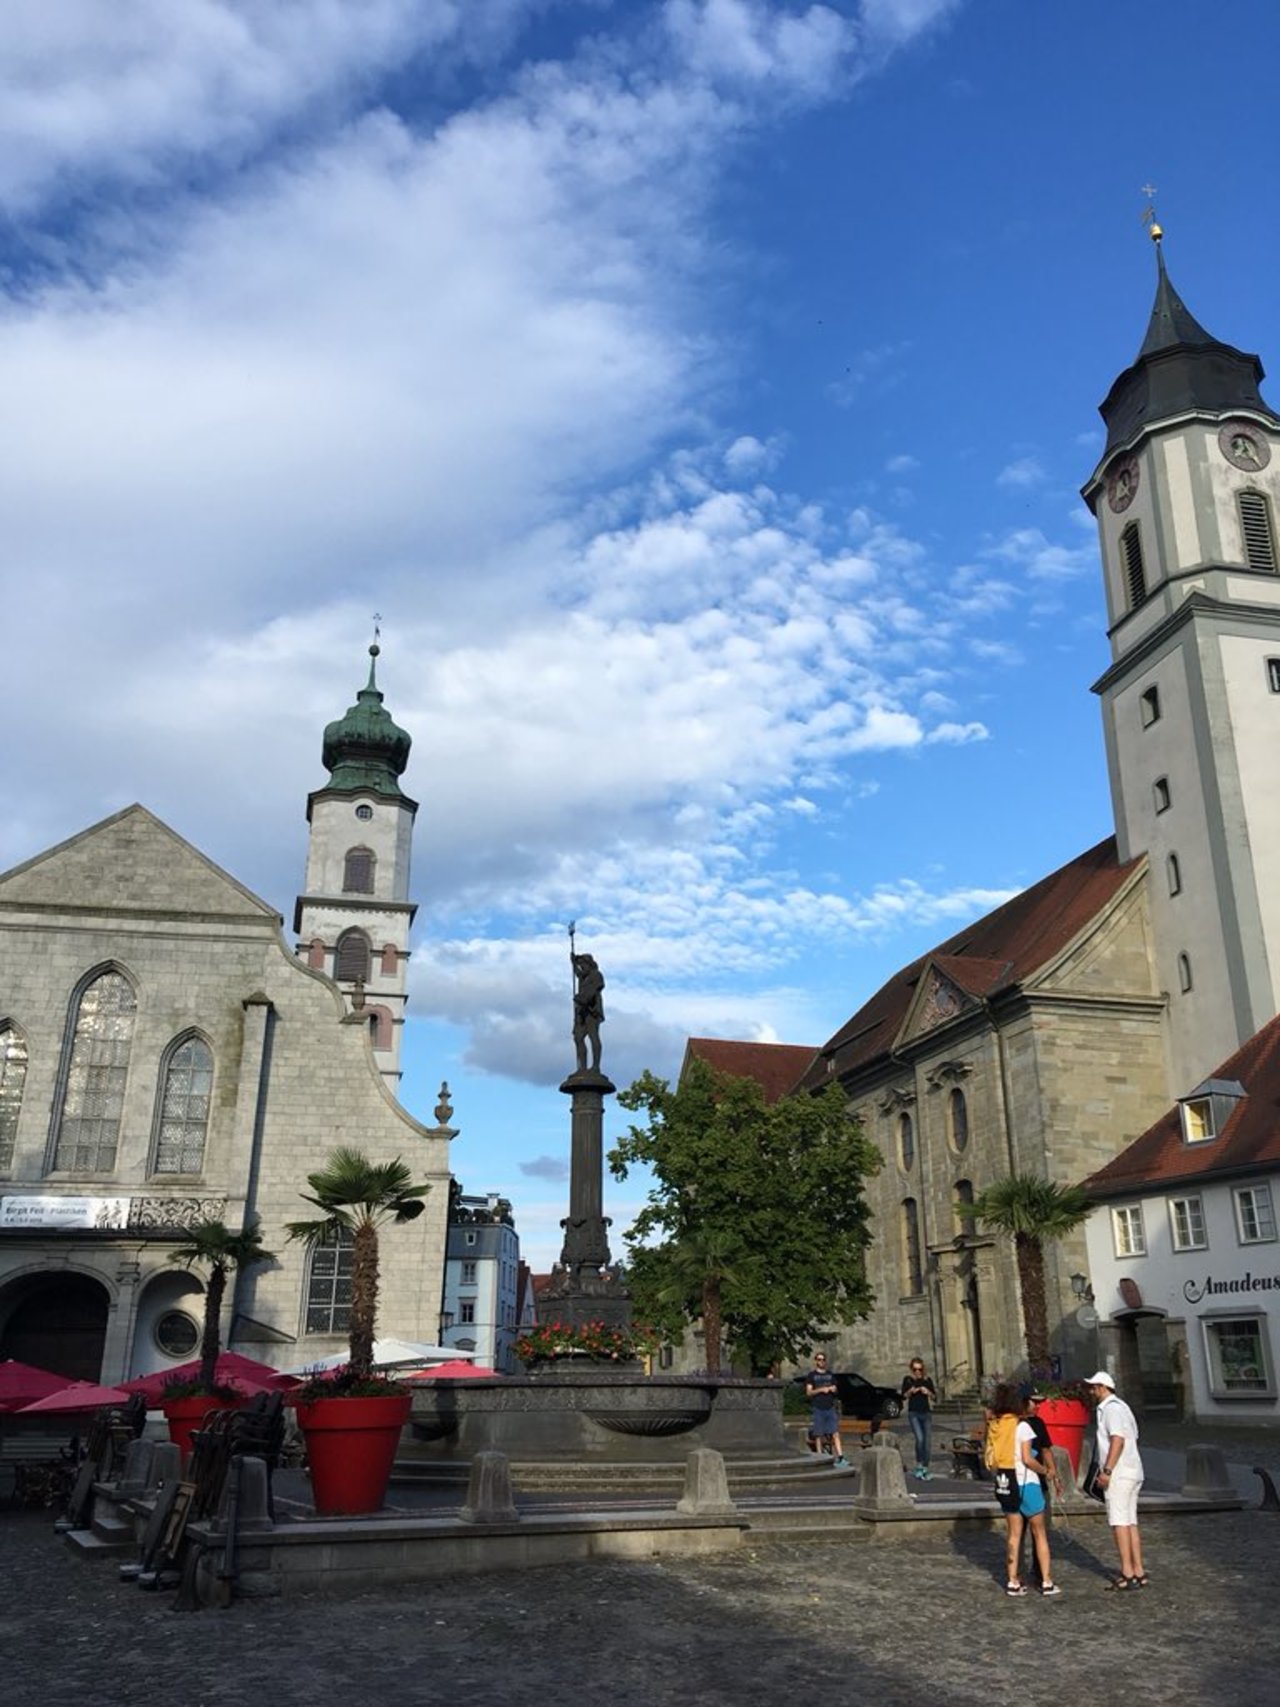 Amazing week in Lindau! So many inspiration and exciting moments. Departure from Lindau! #LINO18 https://t.co/x9j4zNcDHg